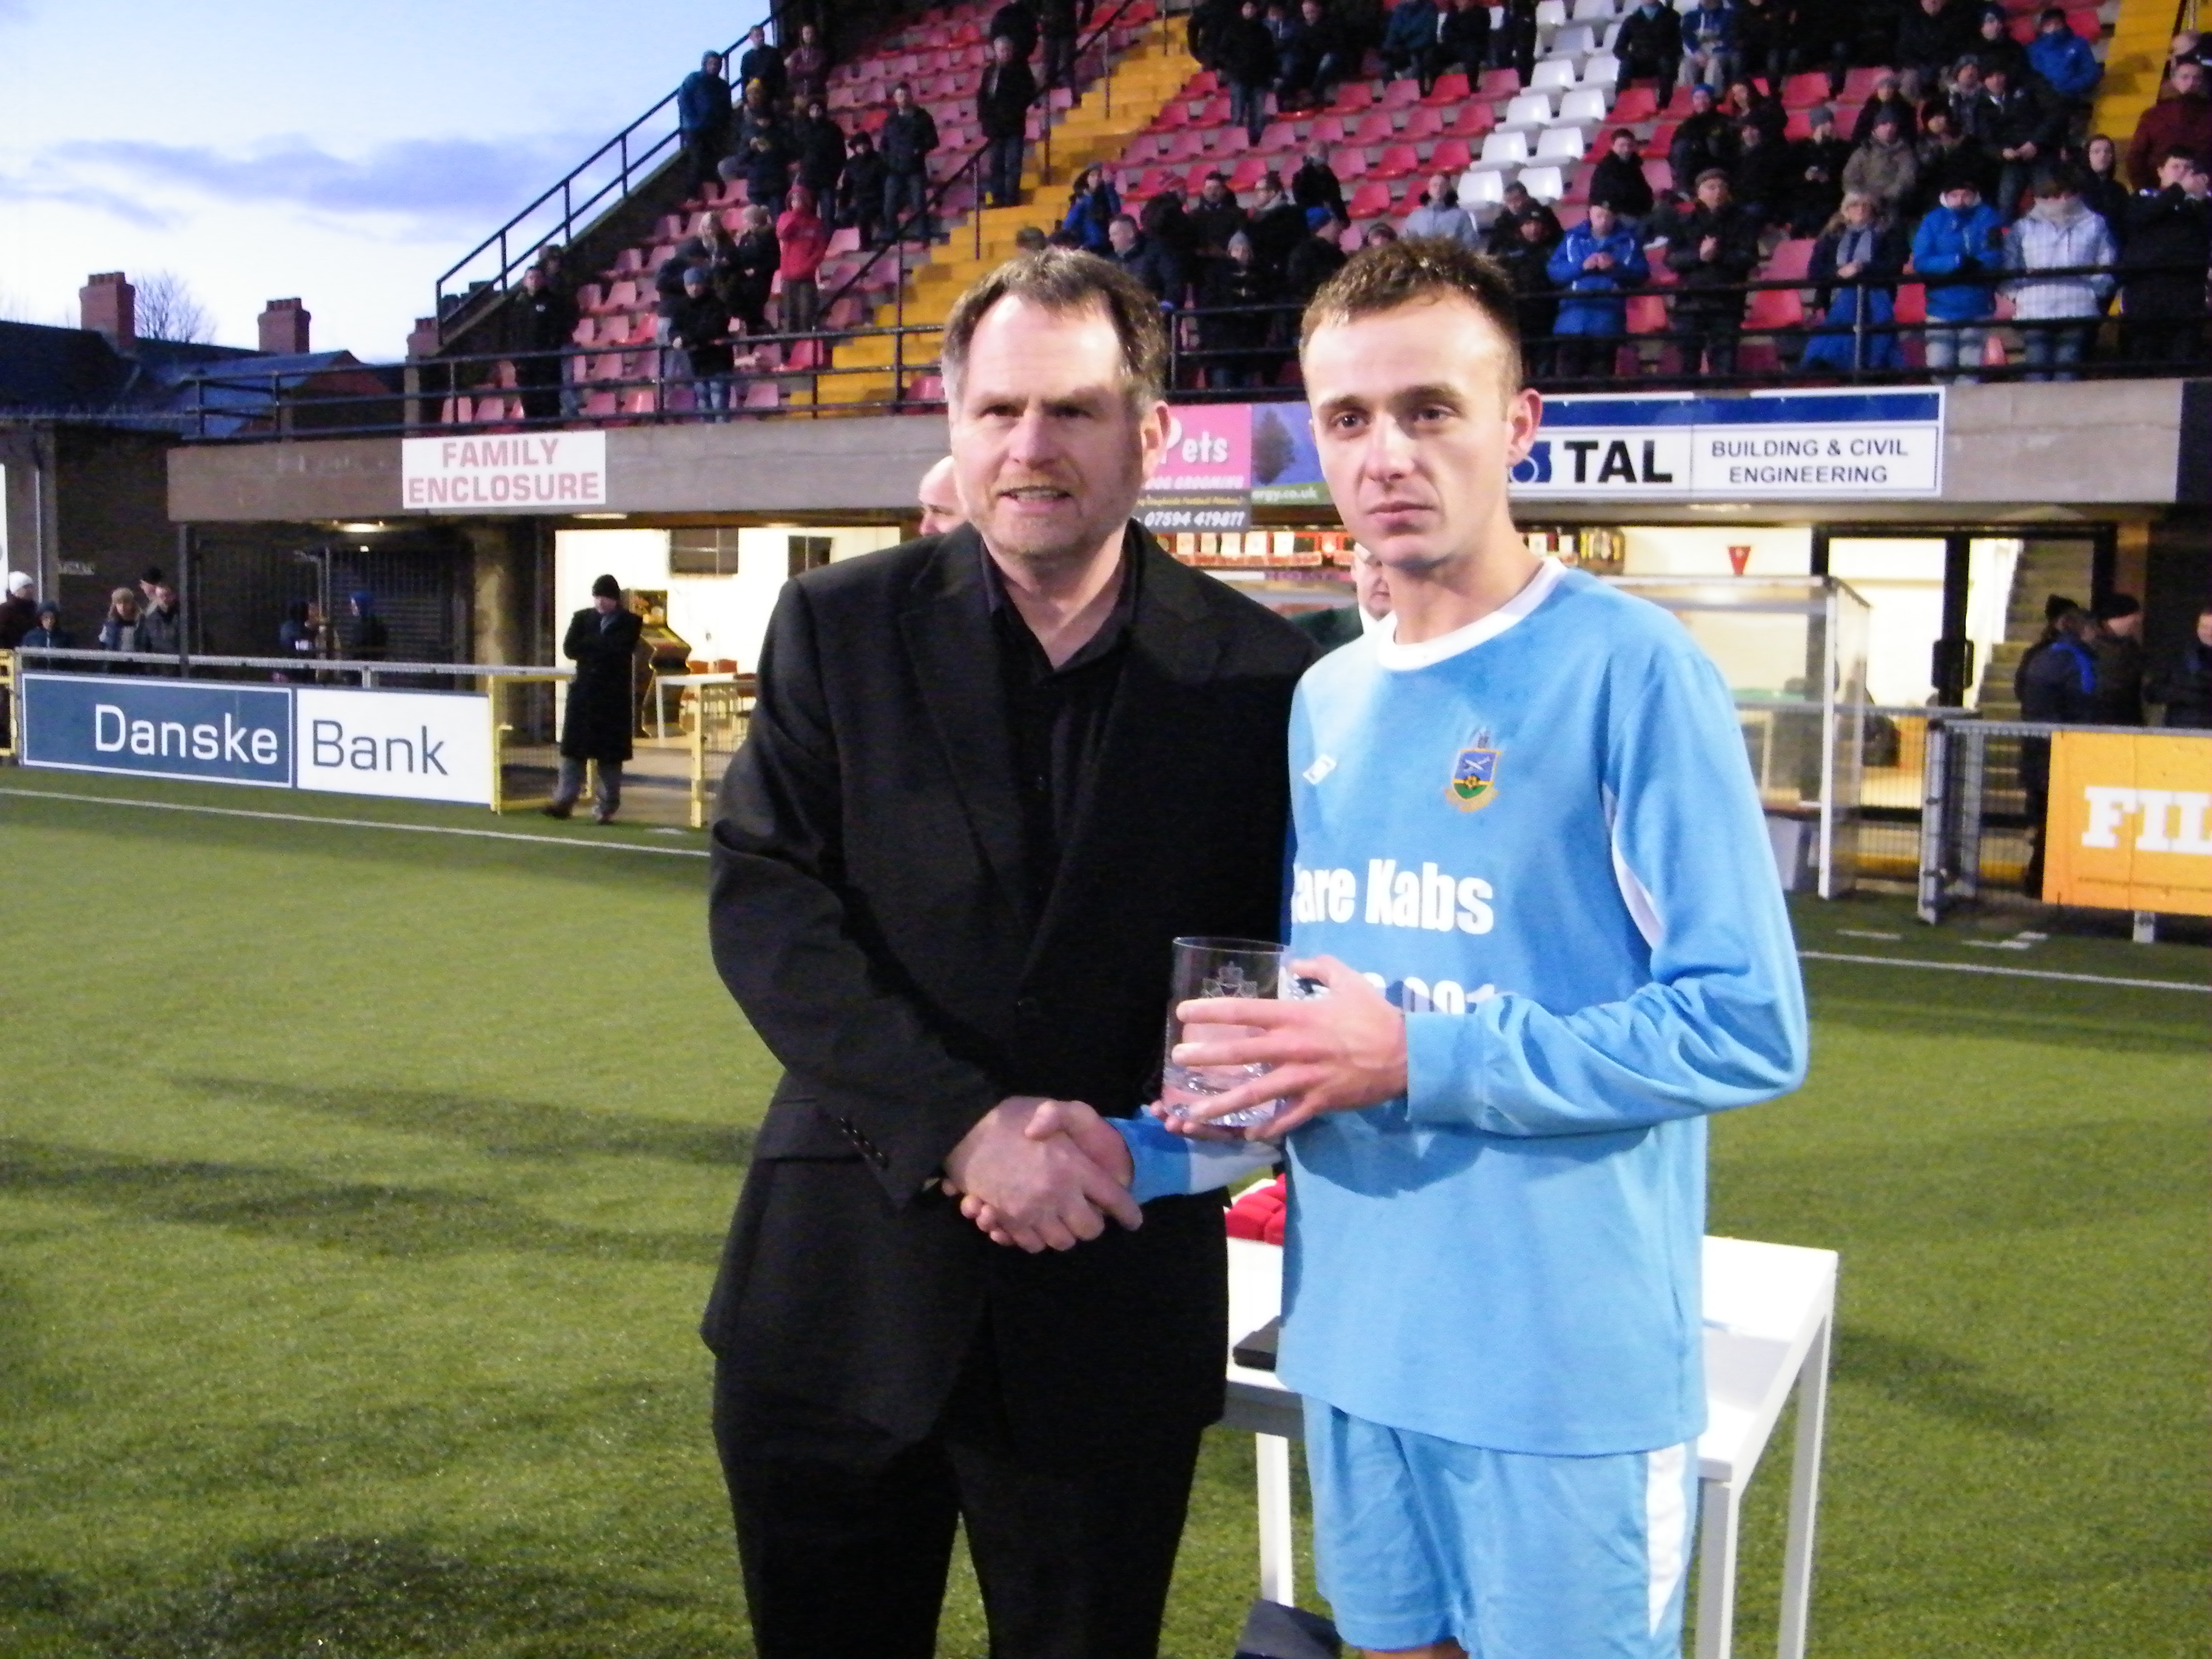 Man of the Match Man of the Match trophy presented to Ryan Newberry of Ards Rgs by Daily Mirror Editor Ronnie Haughey